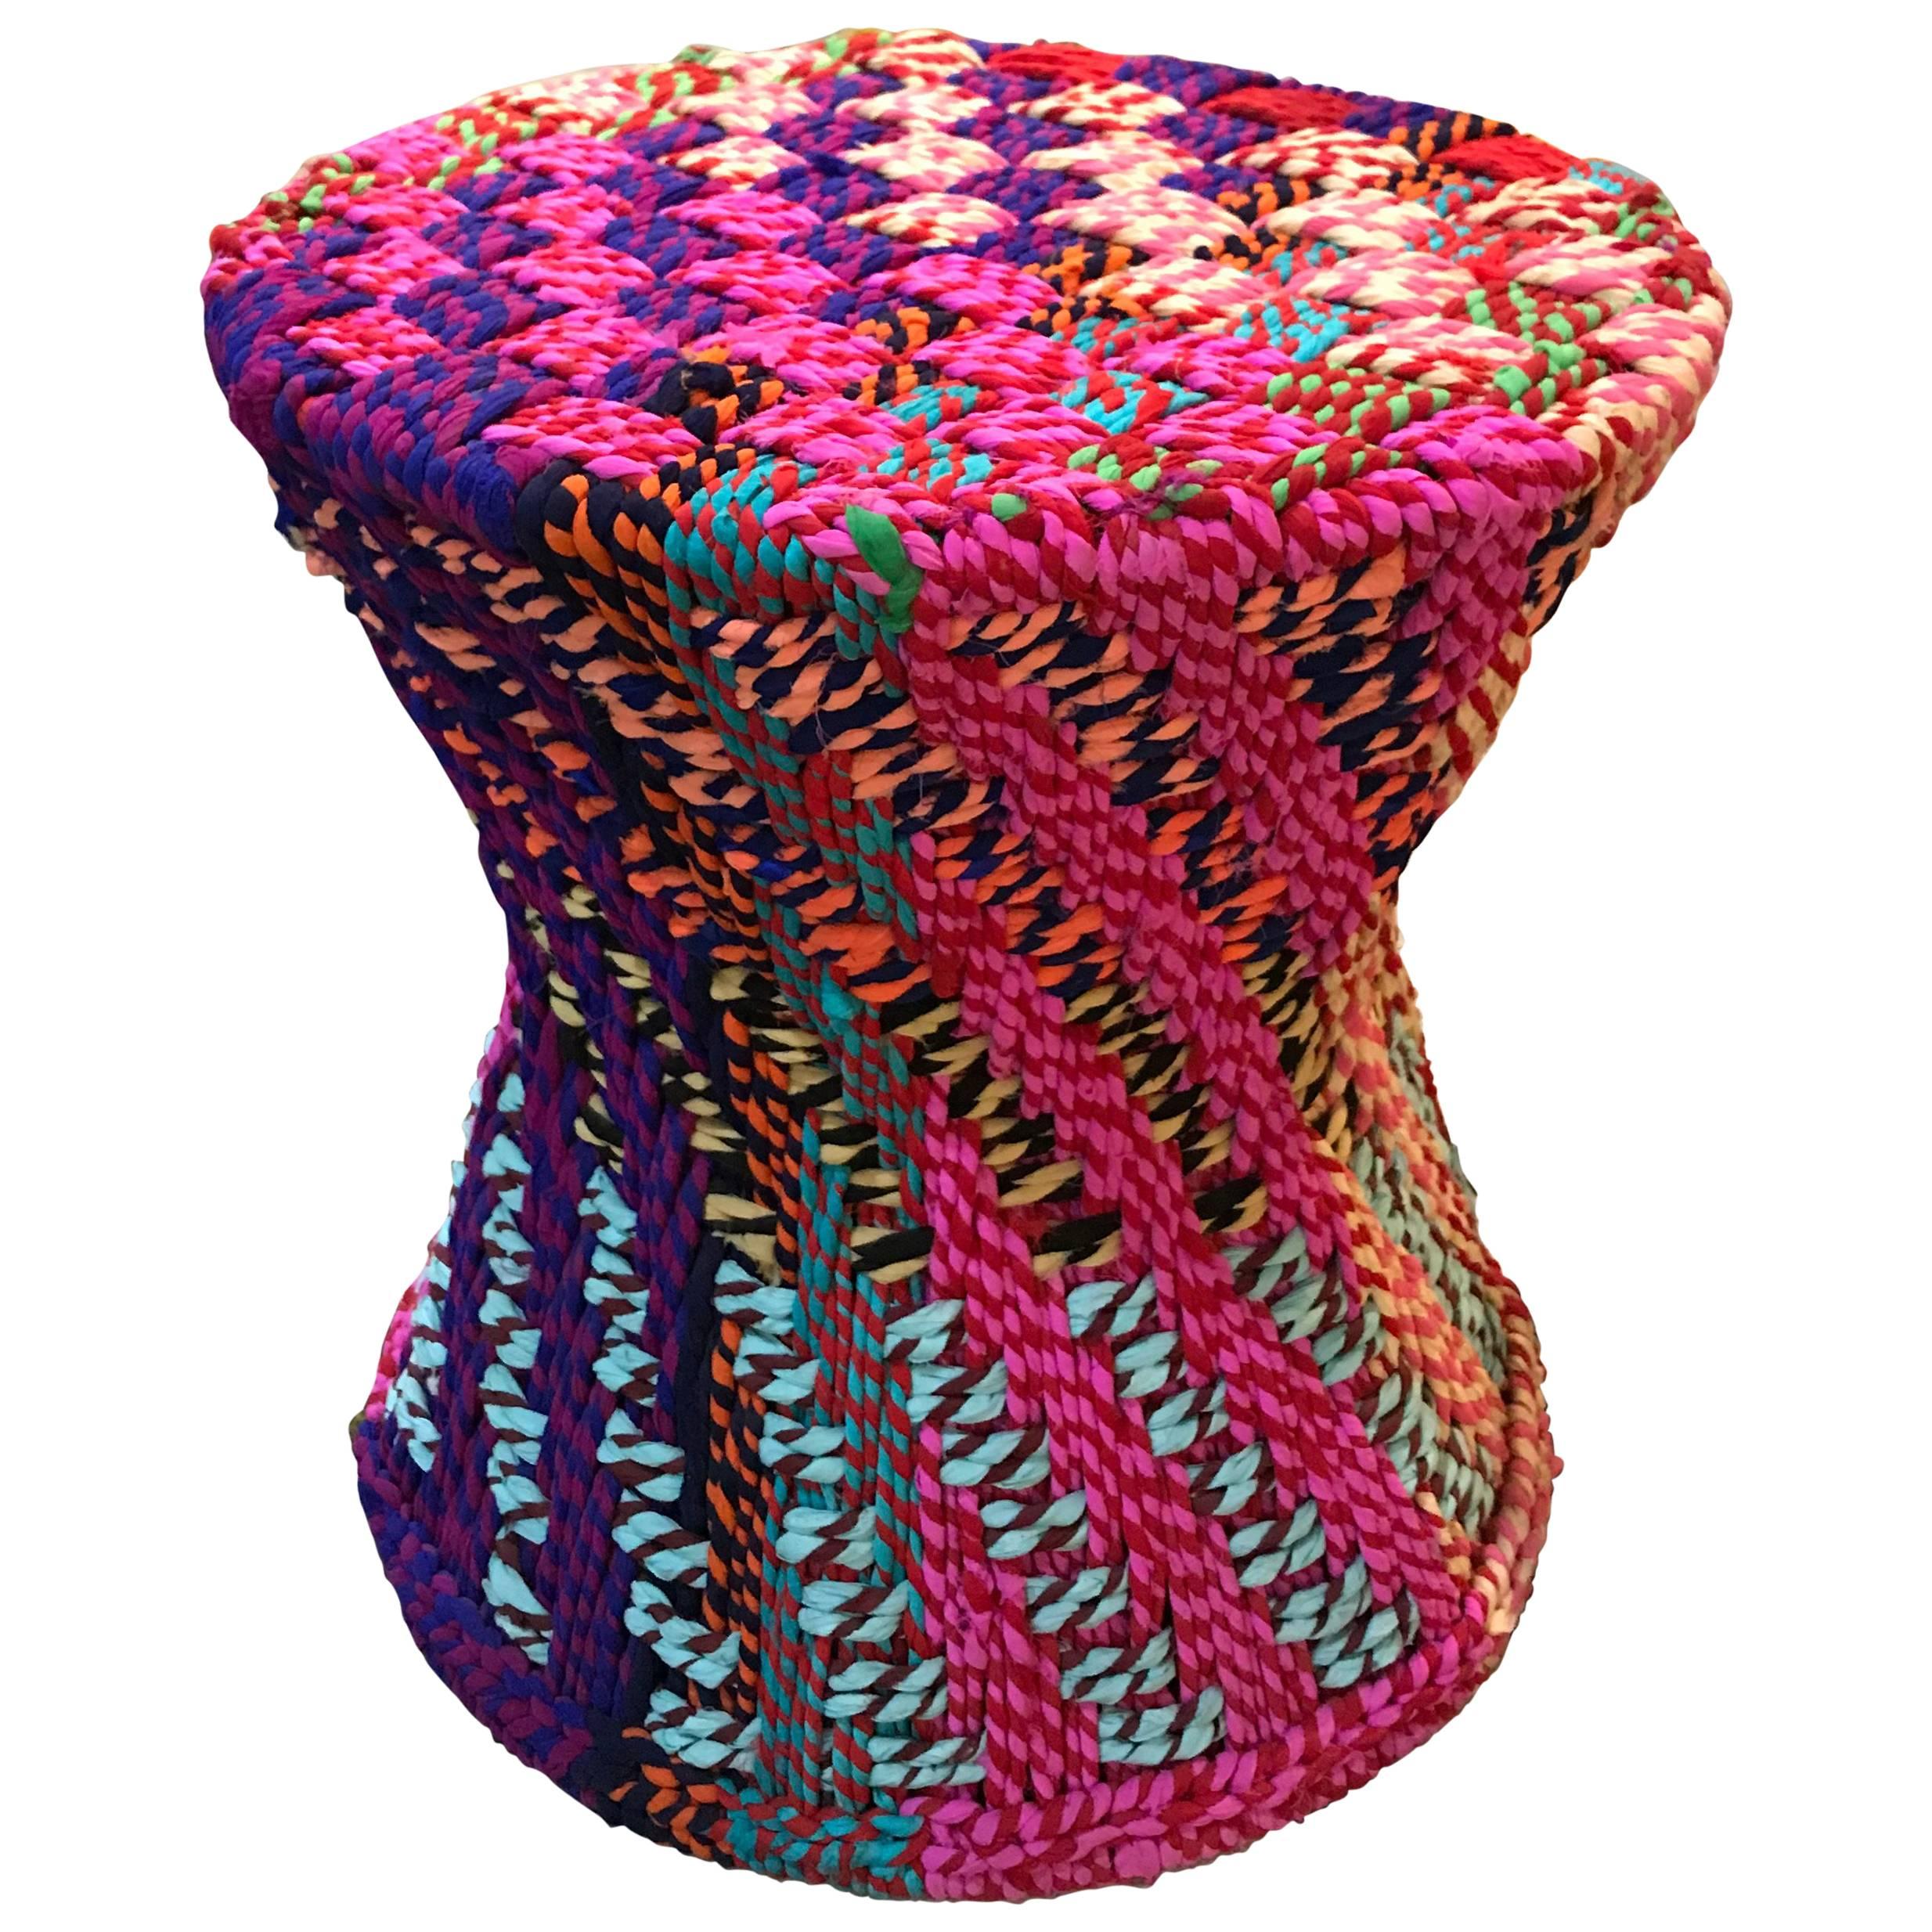 Pr/" It Is Not Missoni" Sidetables or Puffs, Fabric, Super Colors, Handwoven  For Sale